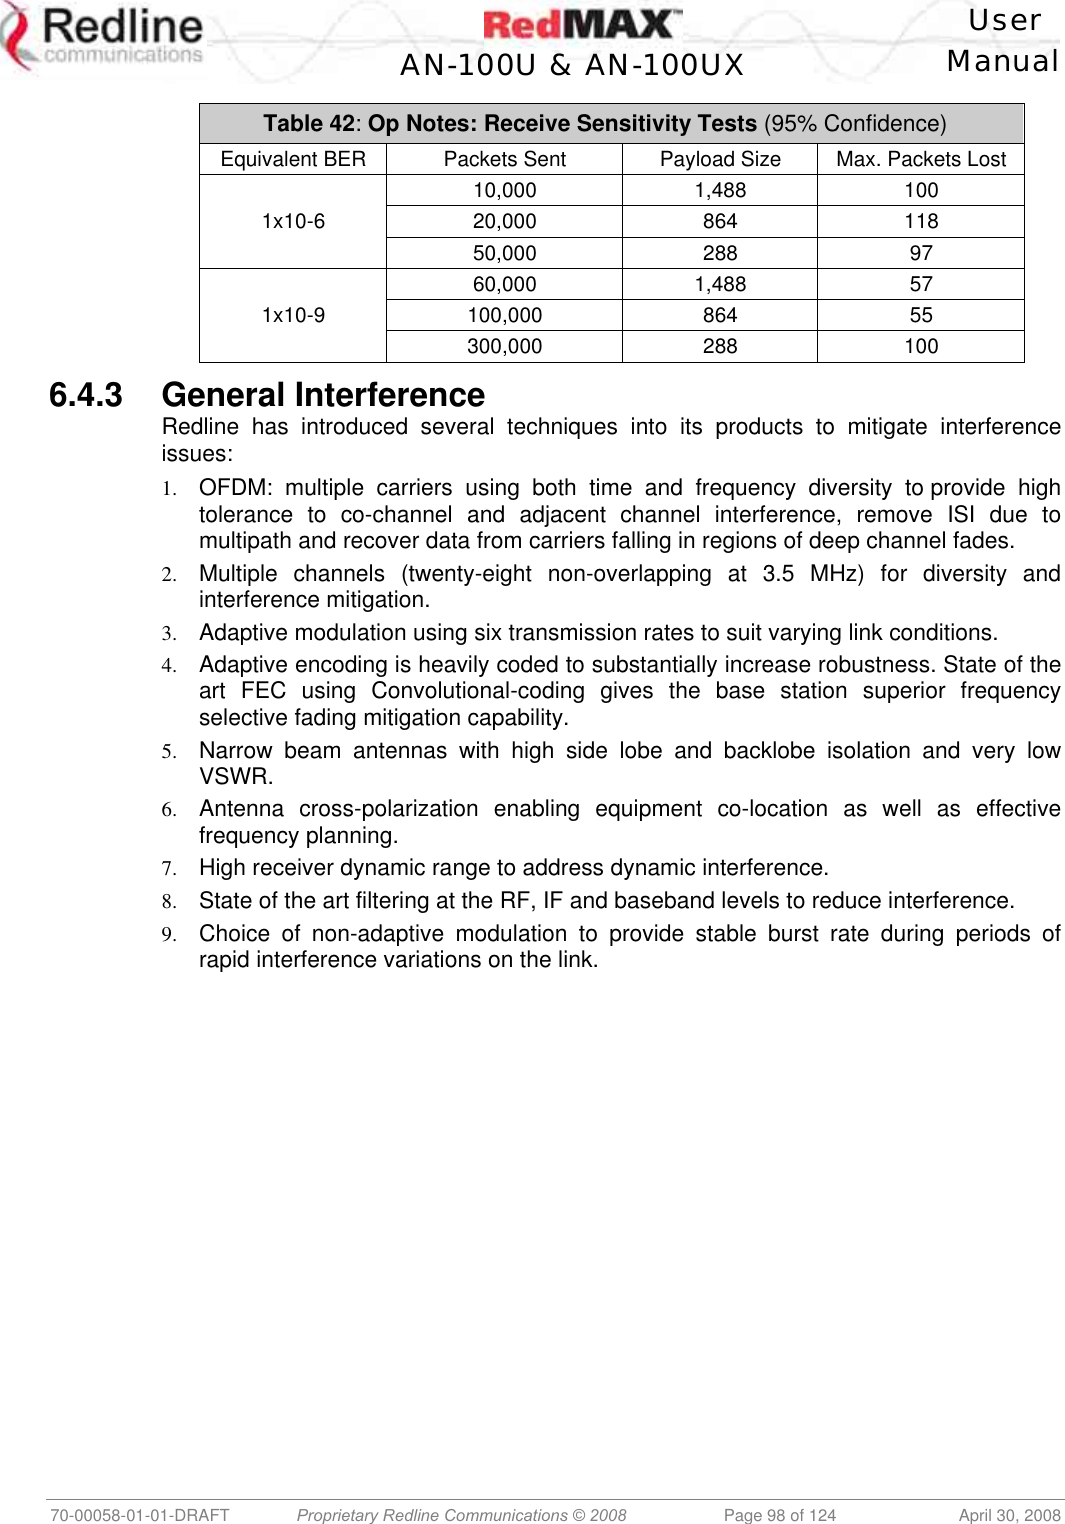    User  AN-100U &amp; AN-100UX Manual   70-00058-01-01-DRAFT  Proprietary Redline Communications © 2008   Page 98 of 124  April 30, 2008 Table 42: Op Notes: Receive Sensitivity Tests (95% Confidence) Equivalent BER  Packets Sent  Payload Size  Max. Packets Lost   10,000 1,488 100 1x10-6 20,000  864  118  50,000 288 97  60,000 1,488 57 1x10-9 100,000  864  55  300,000 288 100 6.4.3 General Interference Redline has introduced several techniques into its products to mitigate interference issues:  1.  OFDM: multiple carriers using both time and frequency diversity to provide high tolerance to co-channel and adjacent channel interference, remove ISI due to multipath and recover data from carriers falling in regions of deep channel fades. 2.  Multiple channels (twenty-eight non-overlapping at 3.5 MHz) for diversity and interference mitigation. 3.  Adaptive modulation using six transmission rates to suit varying link conditions. 4.  Adaptive encoding is heavily coded to substantially increase robustness. State of the art FEC using Convolutional-coding gives the base station superior frequency selective fading mitigation capability. 5.  Narrow beam antennas with high side lobe and backlobe isolation and very low VSWR. 6.  Antenna cross-polarization enabling equipment co-location as well as effective frequency planning. 7.  High receiver dynamic range to address dynamic interference. 8.  State of the art filtering at the RF, IF and baseband levels to reduce interference. 9.  Choice of non-adaptive modulation to provide stable burst rate during periods of rapid interference variations on the link. 